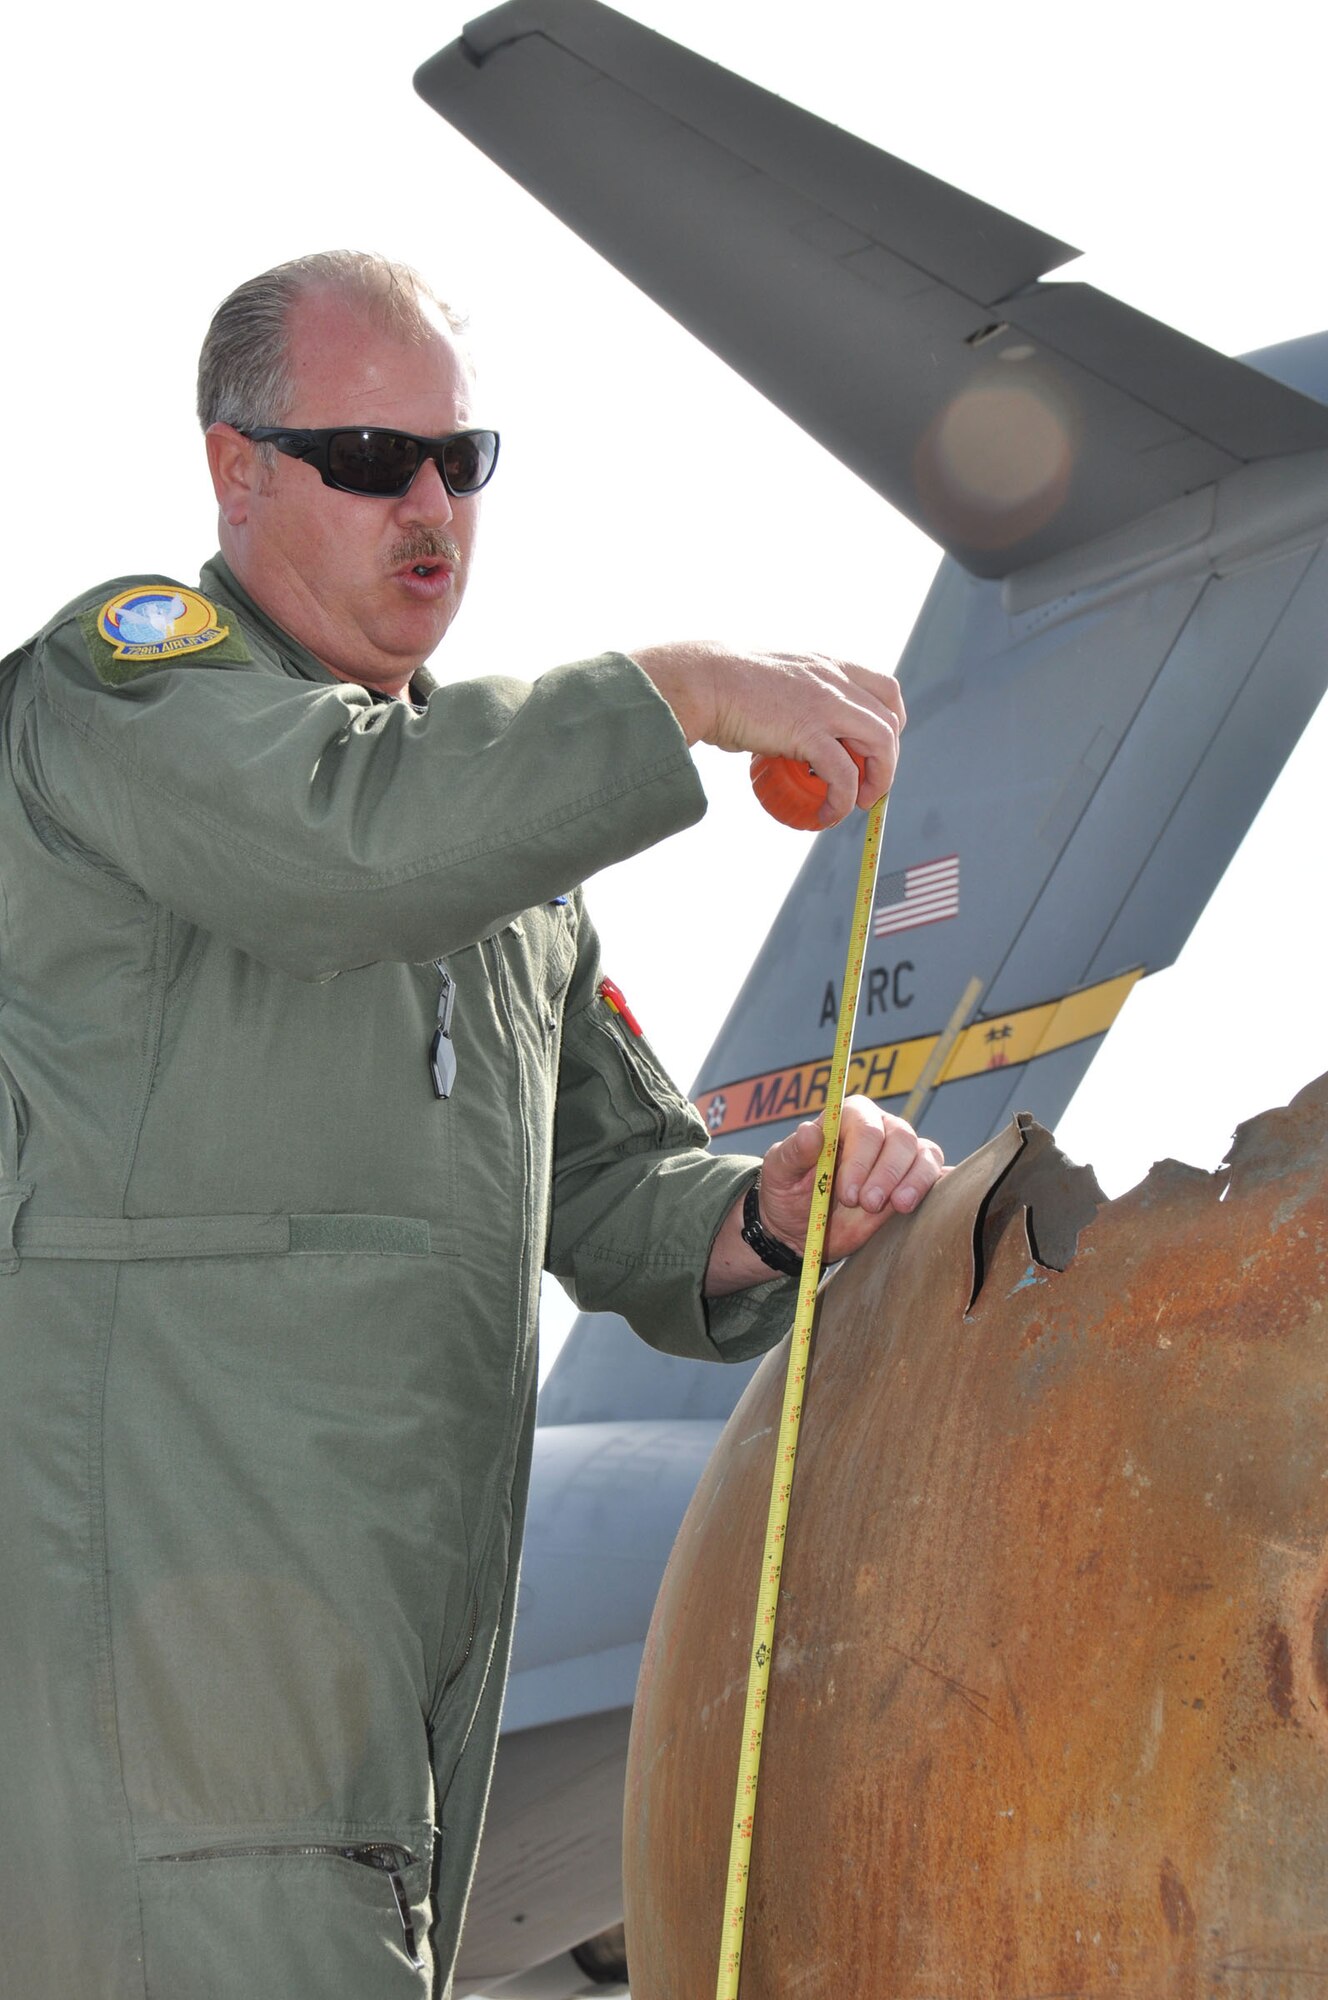 Master Sgt. Lance Augustine, a 729th Airlift Squadron loadmaster, measures the dimensions of an expended  stage II rocket in Mongolia, Aug. 26, 2011.  Augustine was part of a 15-person Air Force Reserve crew that departed from March Air Reserve Base, Calif.,  on a mission to Mongolia to retrieve fallen satellite parts for NASA.  (U.S. Air Force photo/Master Sgt. Linda Welz)